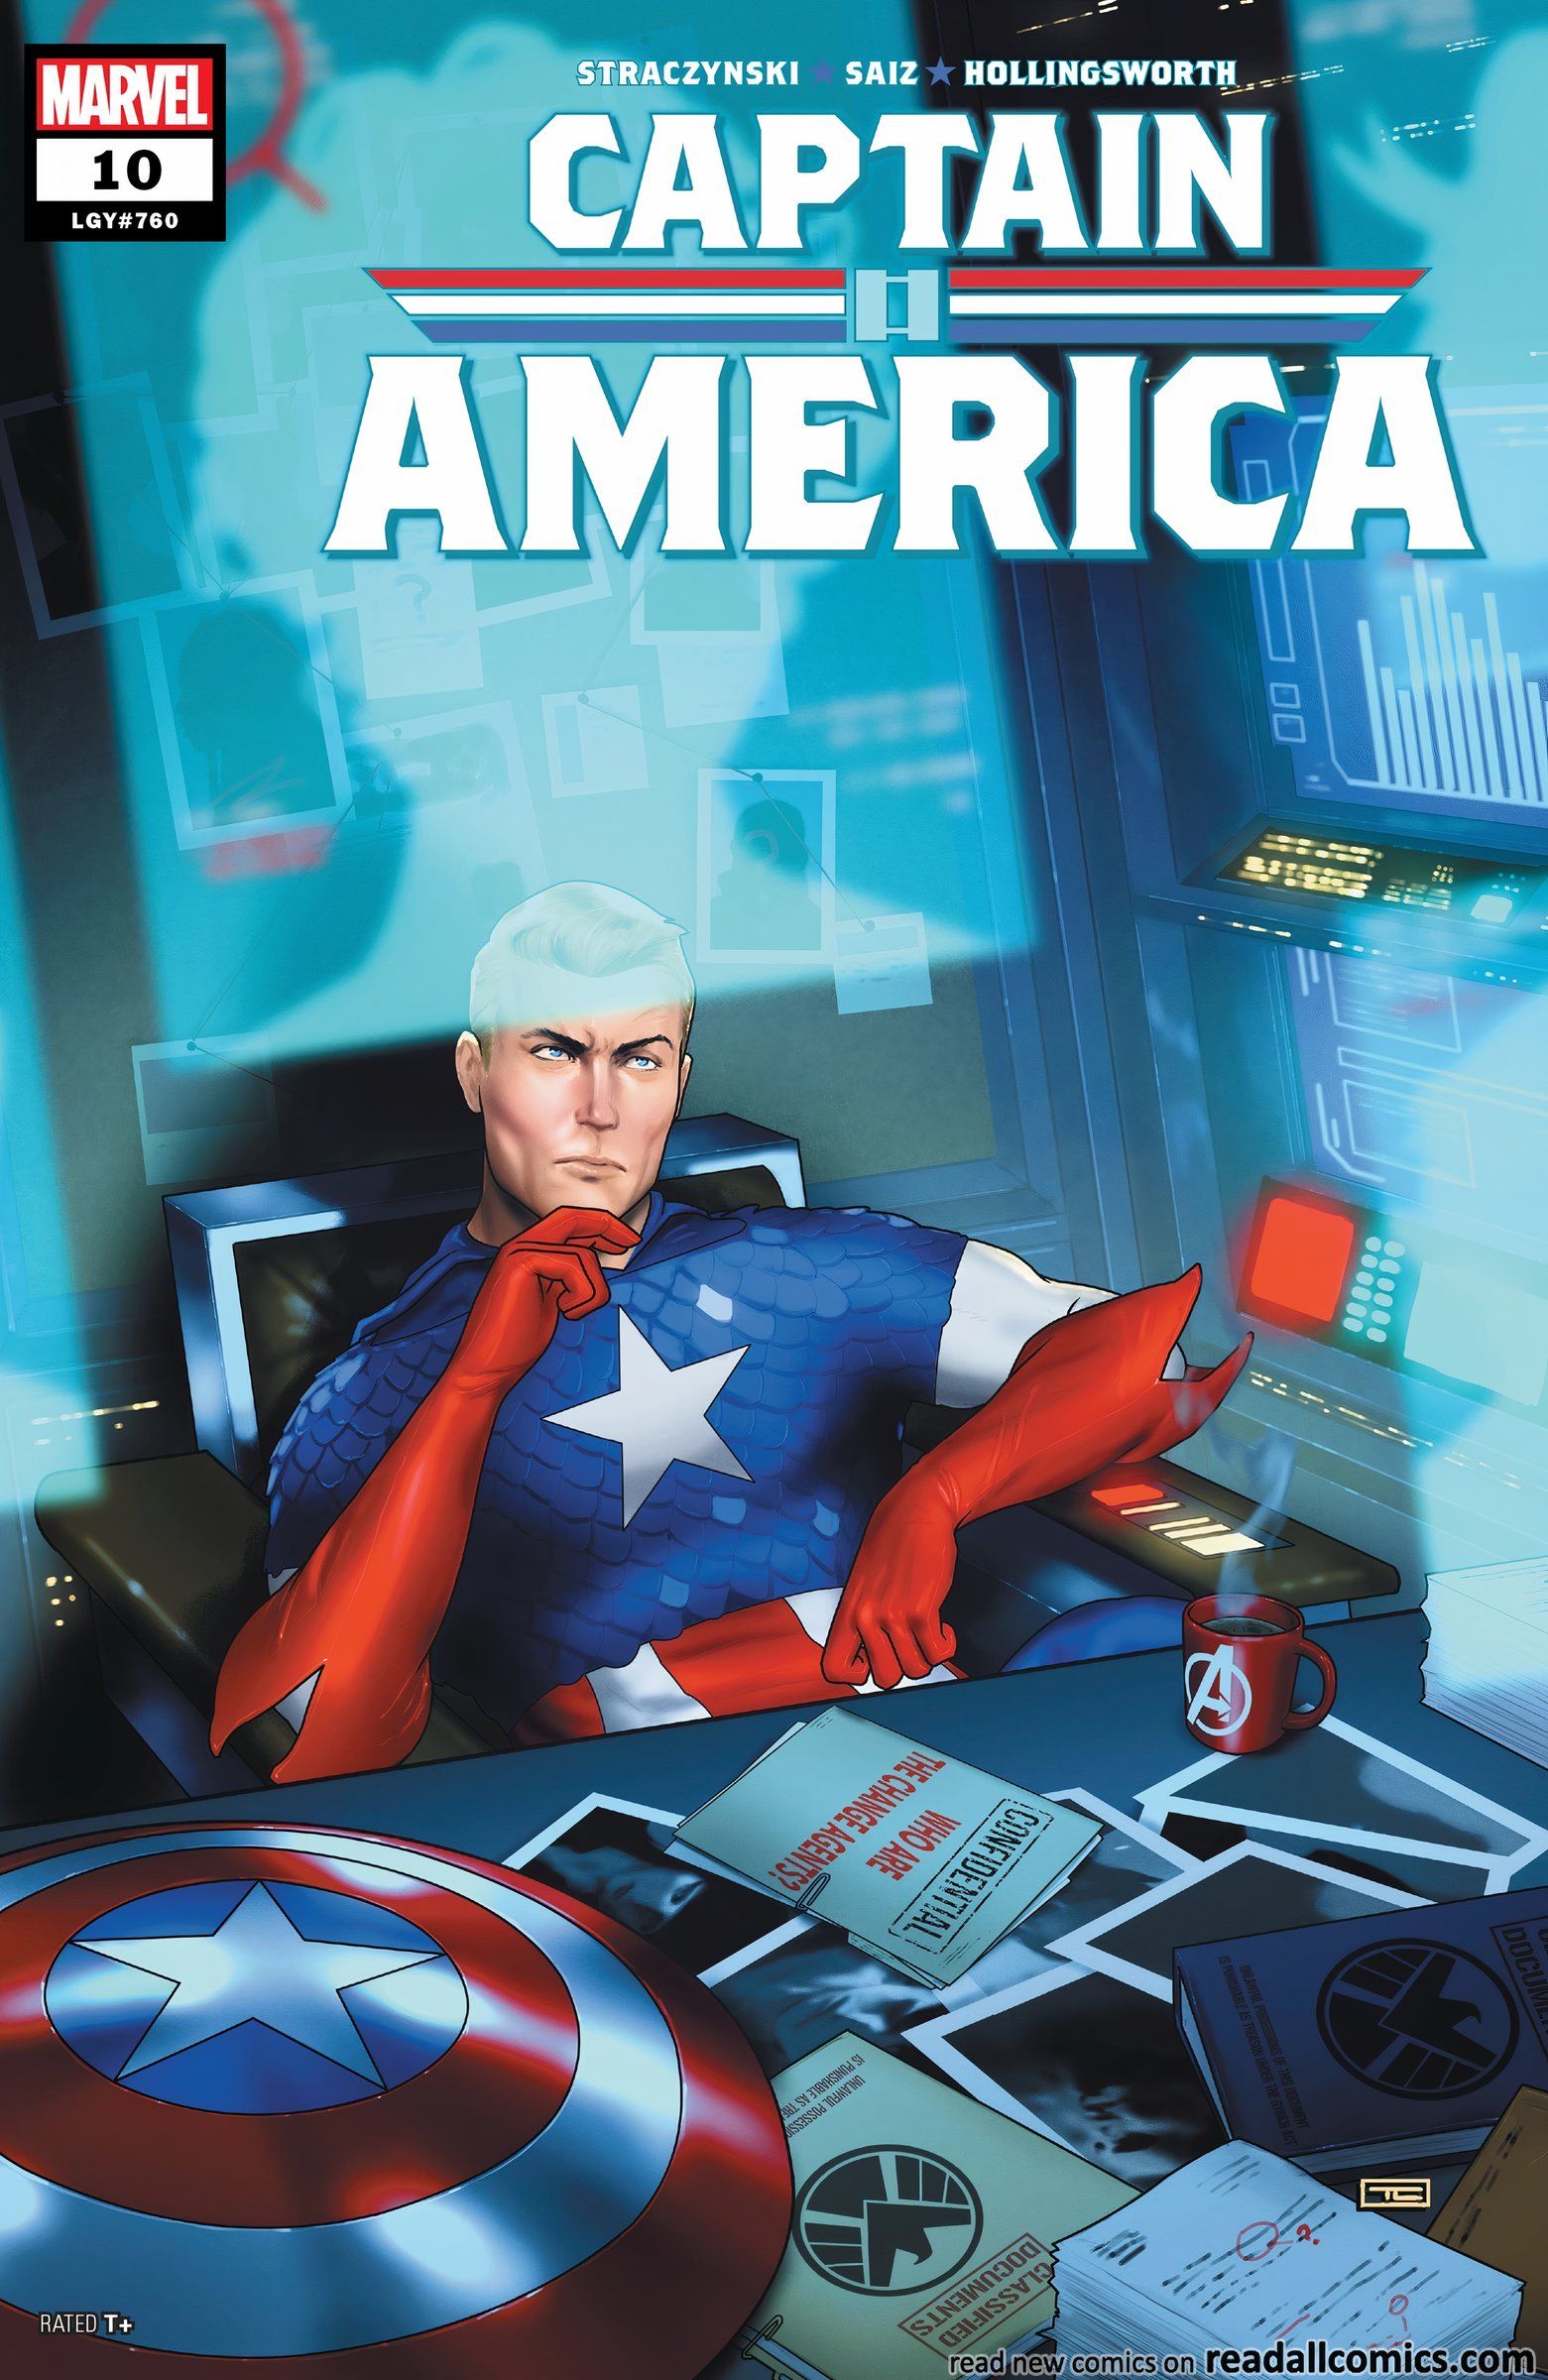 An unmasked Captain America sits in front of a blue screen, his shield, and a confidential file. 